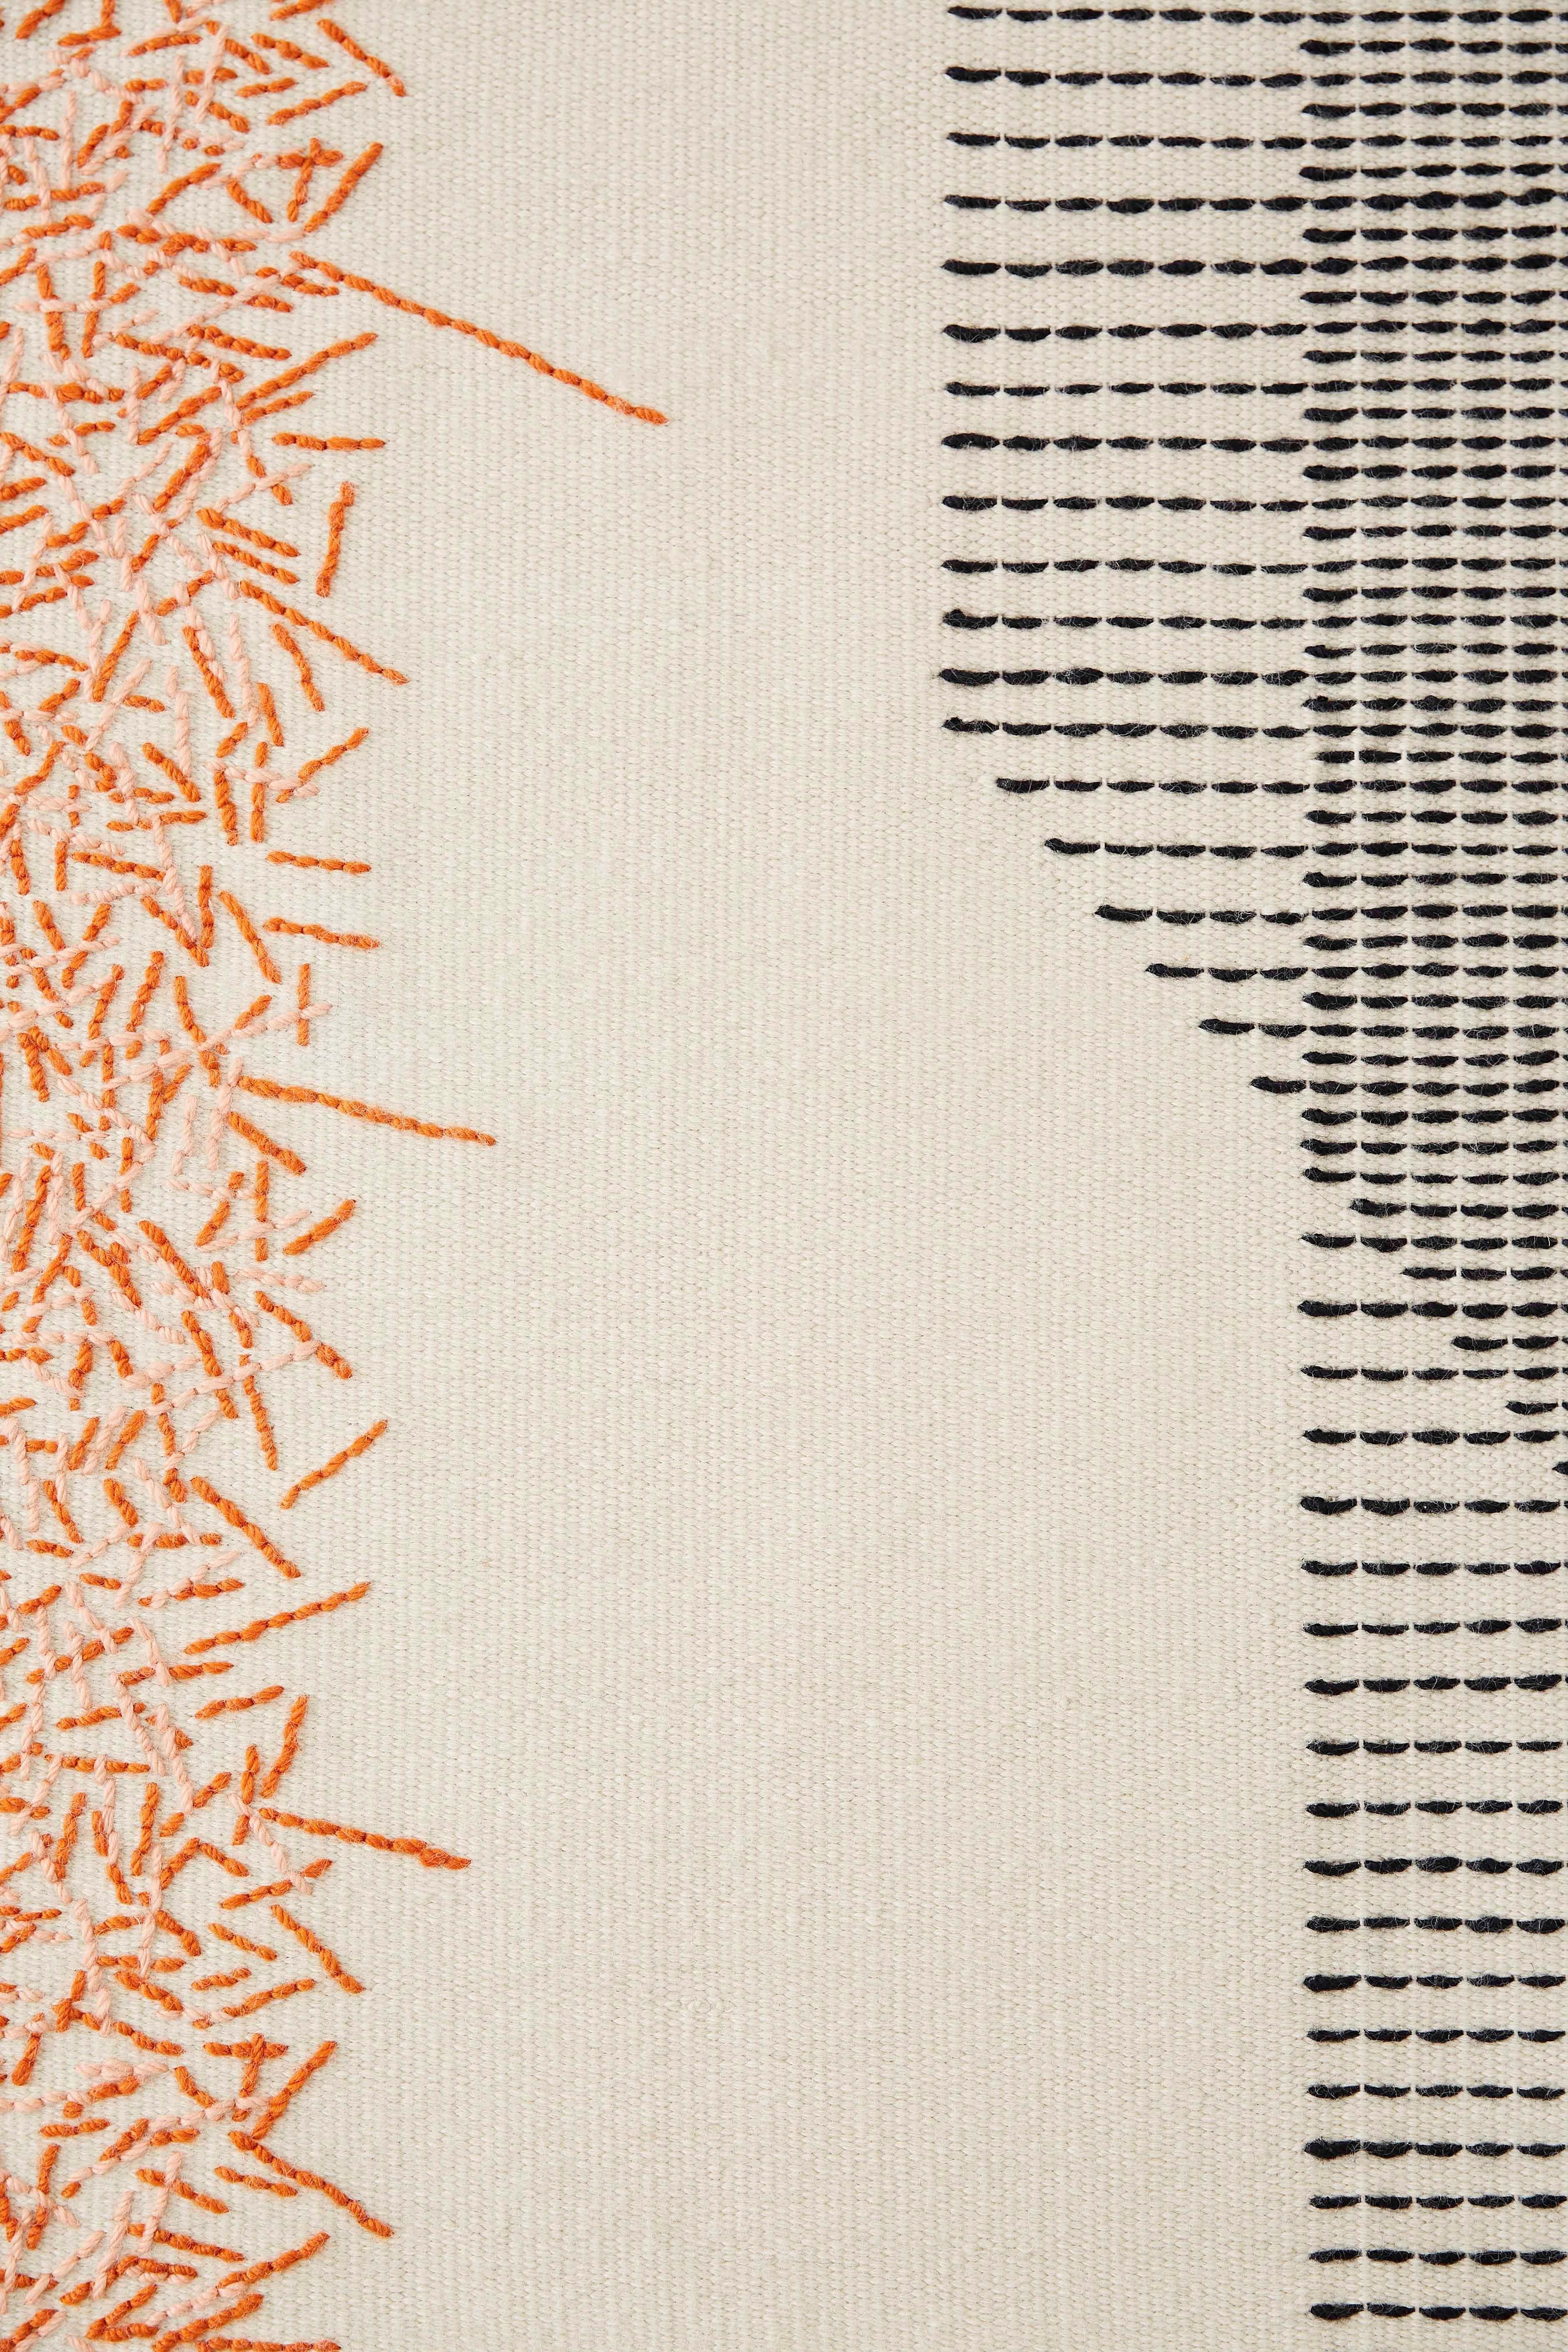 Learning about embroidery – GAN’s incredible craft and strength – Raw-Edges found themselves drawn to the aesthetics on its reverse side. The ‘back stitch’ has an unintentional hidden beauty to it, that one might so easily miss. Their aim was to